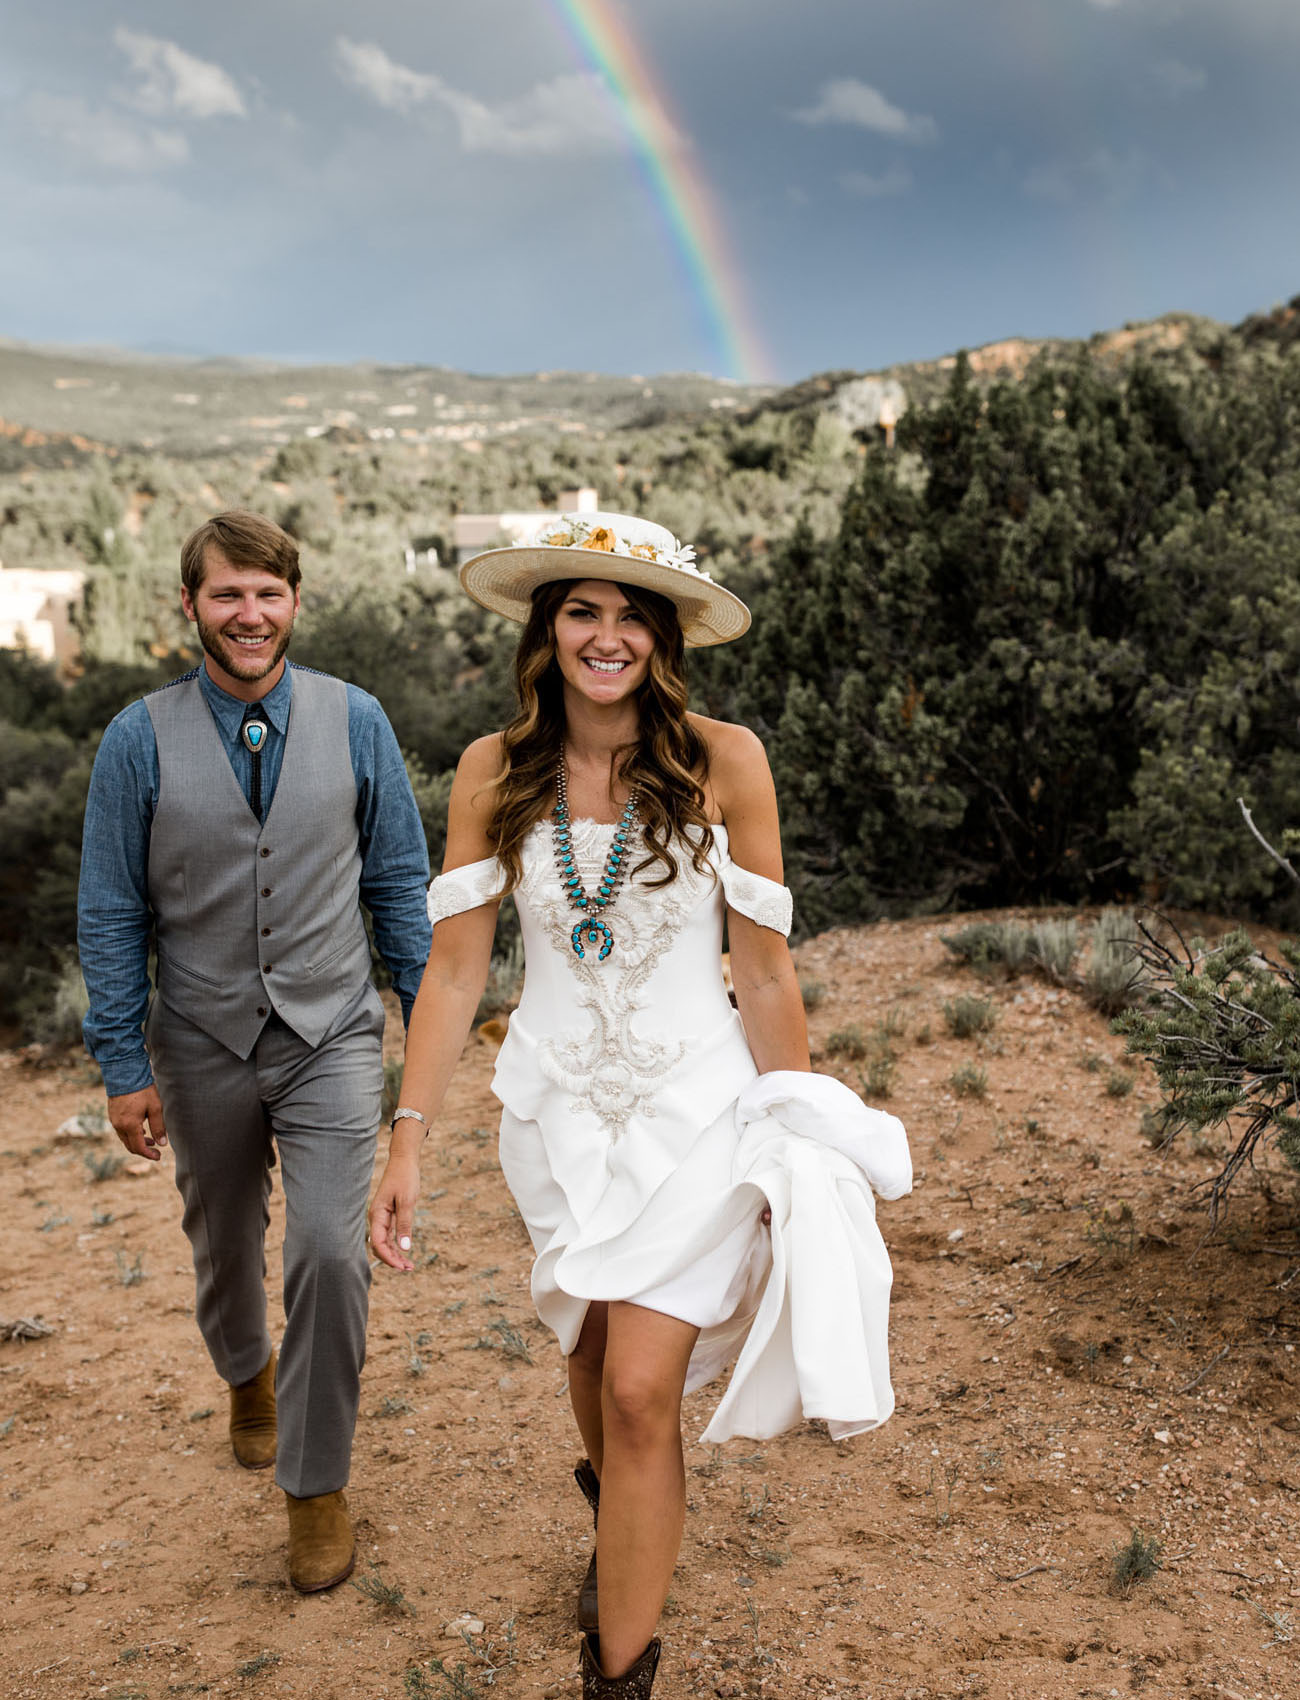 This pretty couple went for a boho western wedding in New Mexico